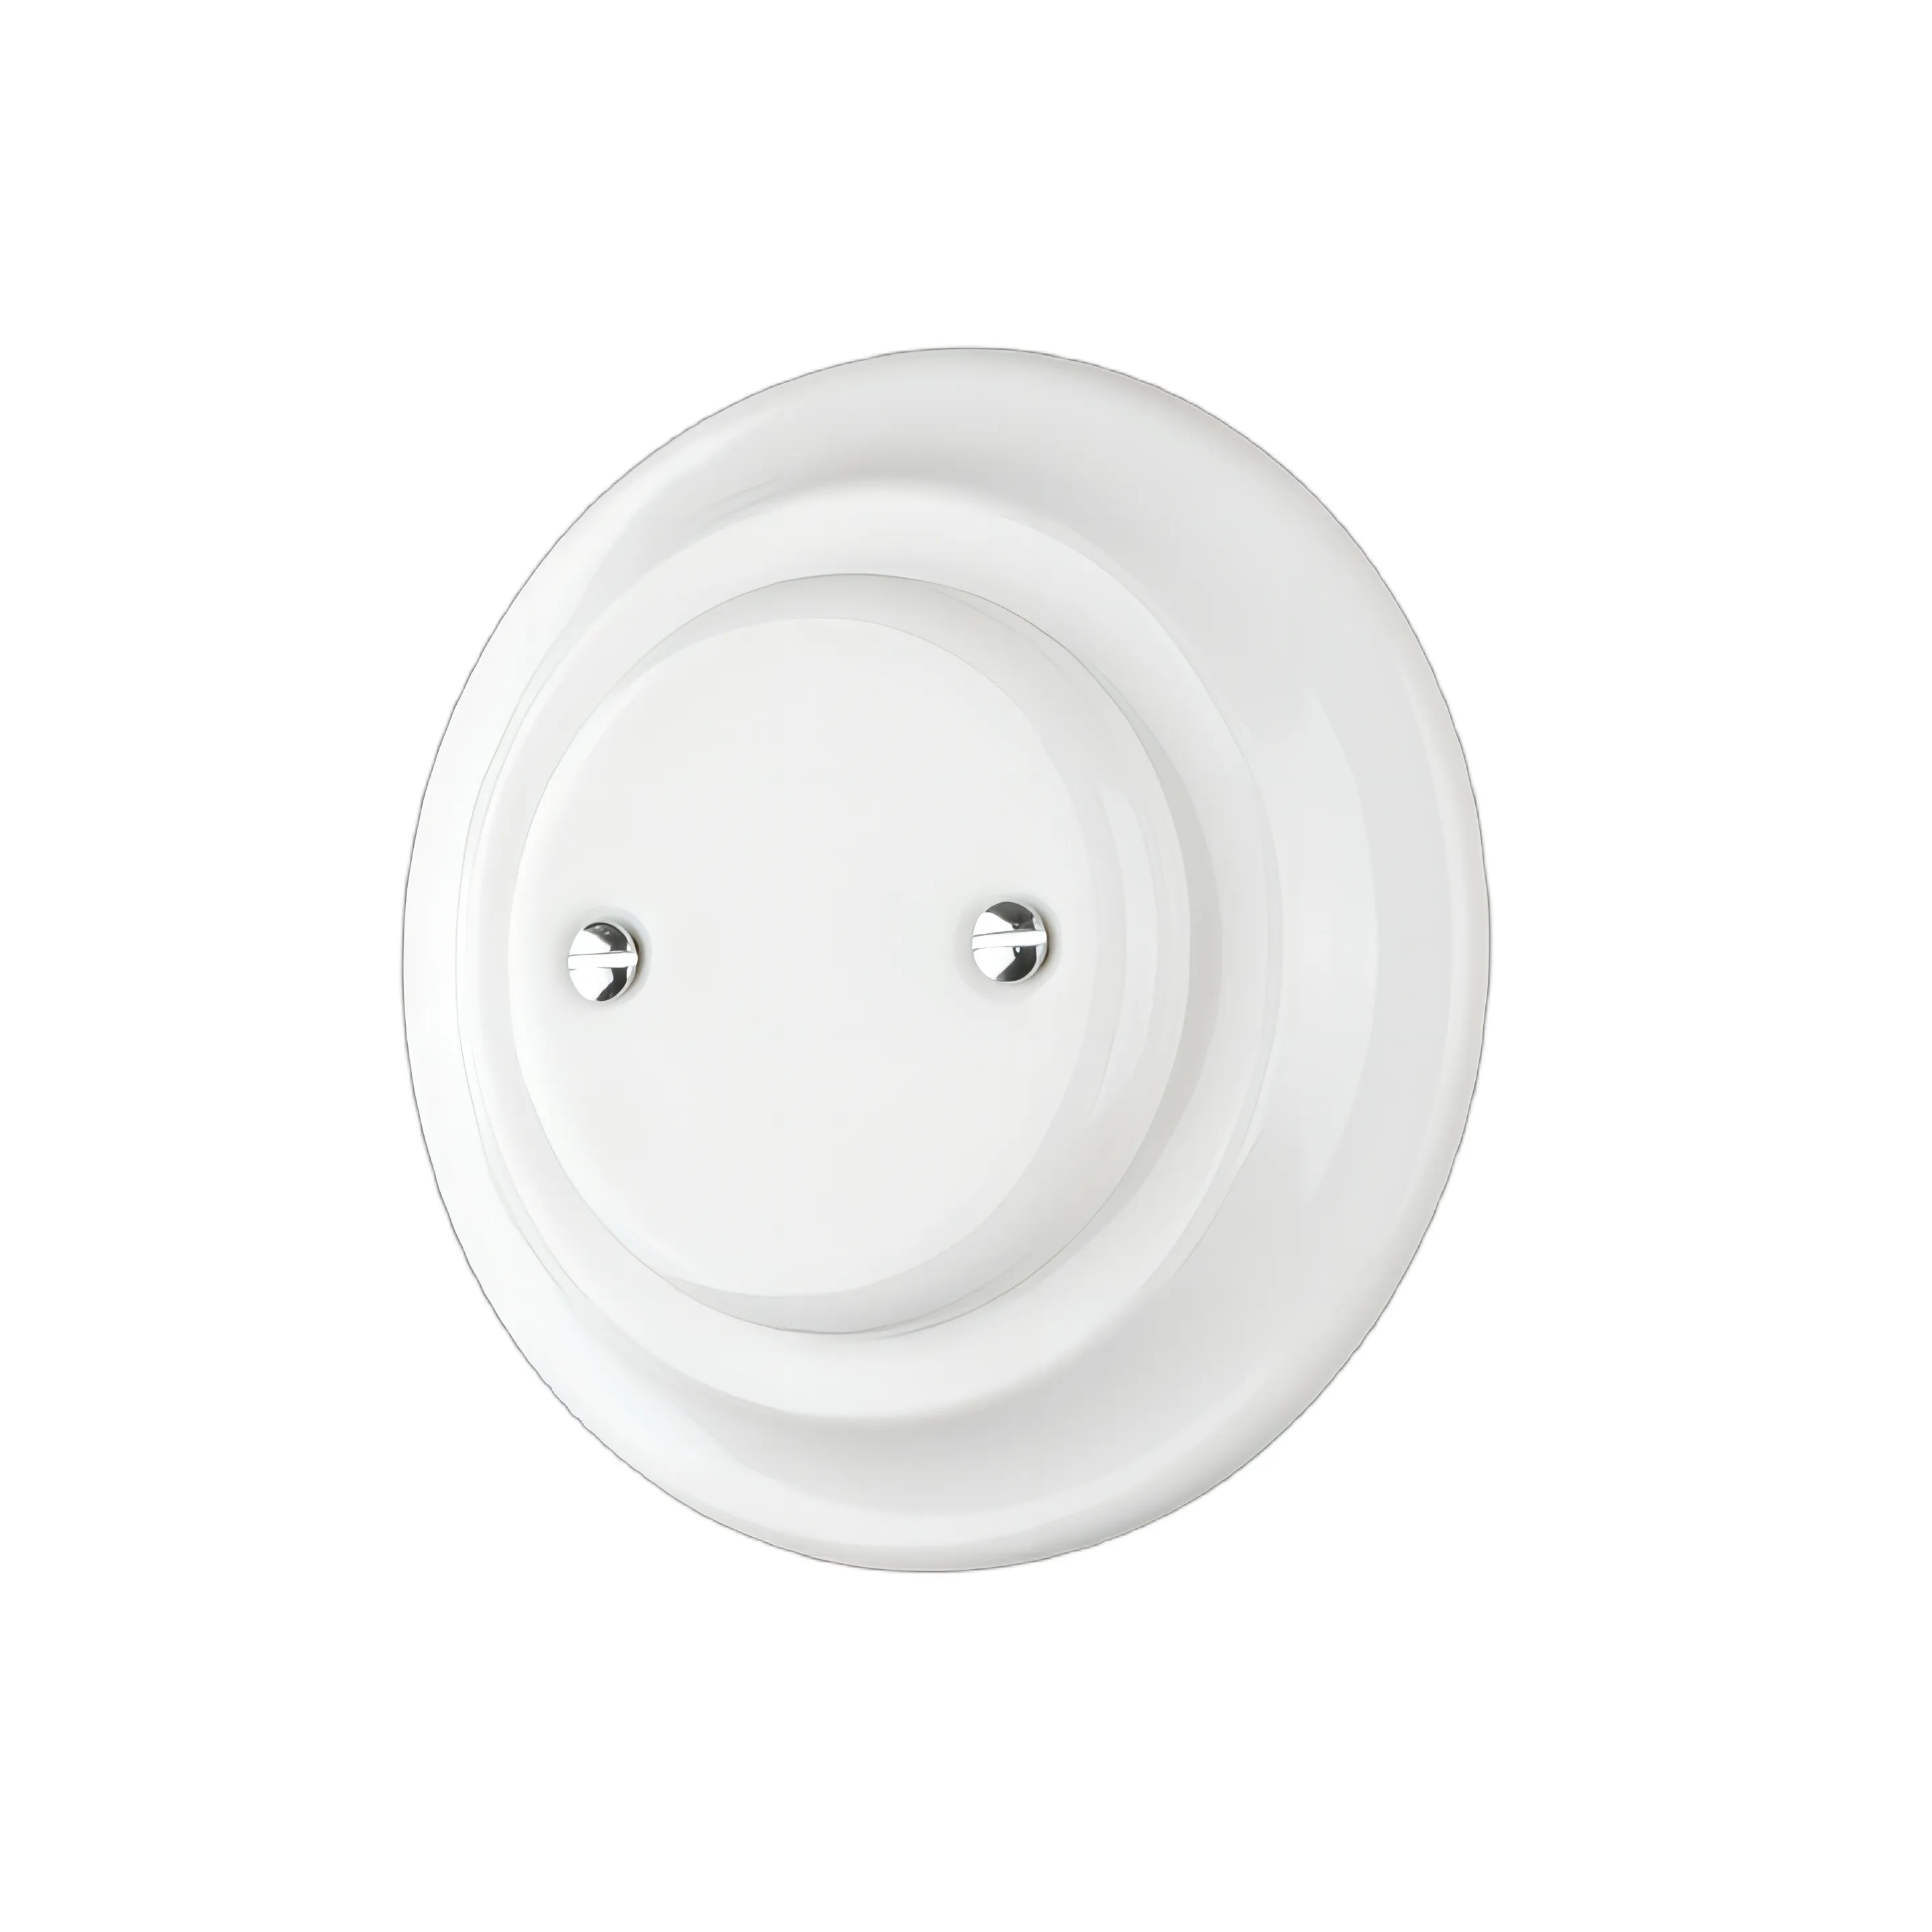 Retro Porcelain Flush Mounted Blind Cover Ceramic Cover Without any Holes to Protect the Circuit